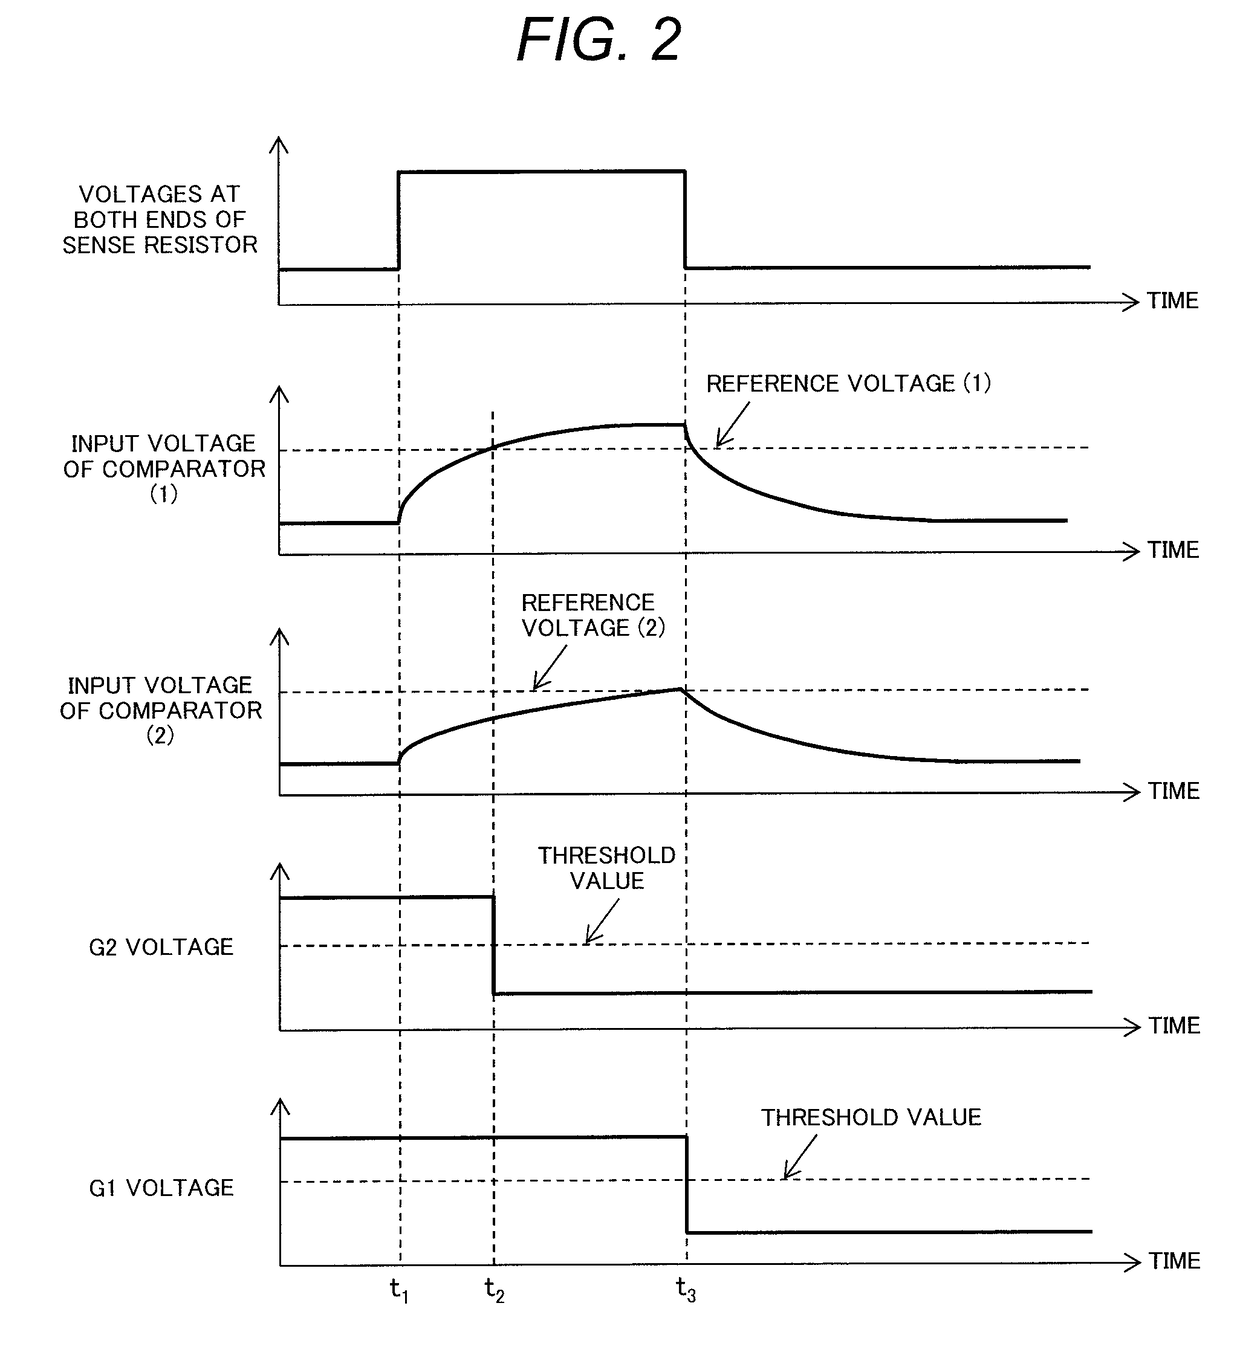 Apparatus for controlling insulating gate-type semiconductor element, and power conversion apparatus using apparatus for controlling insulating gate-type semiconductor element